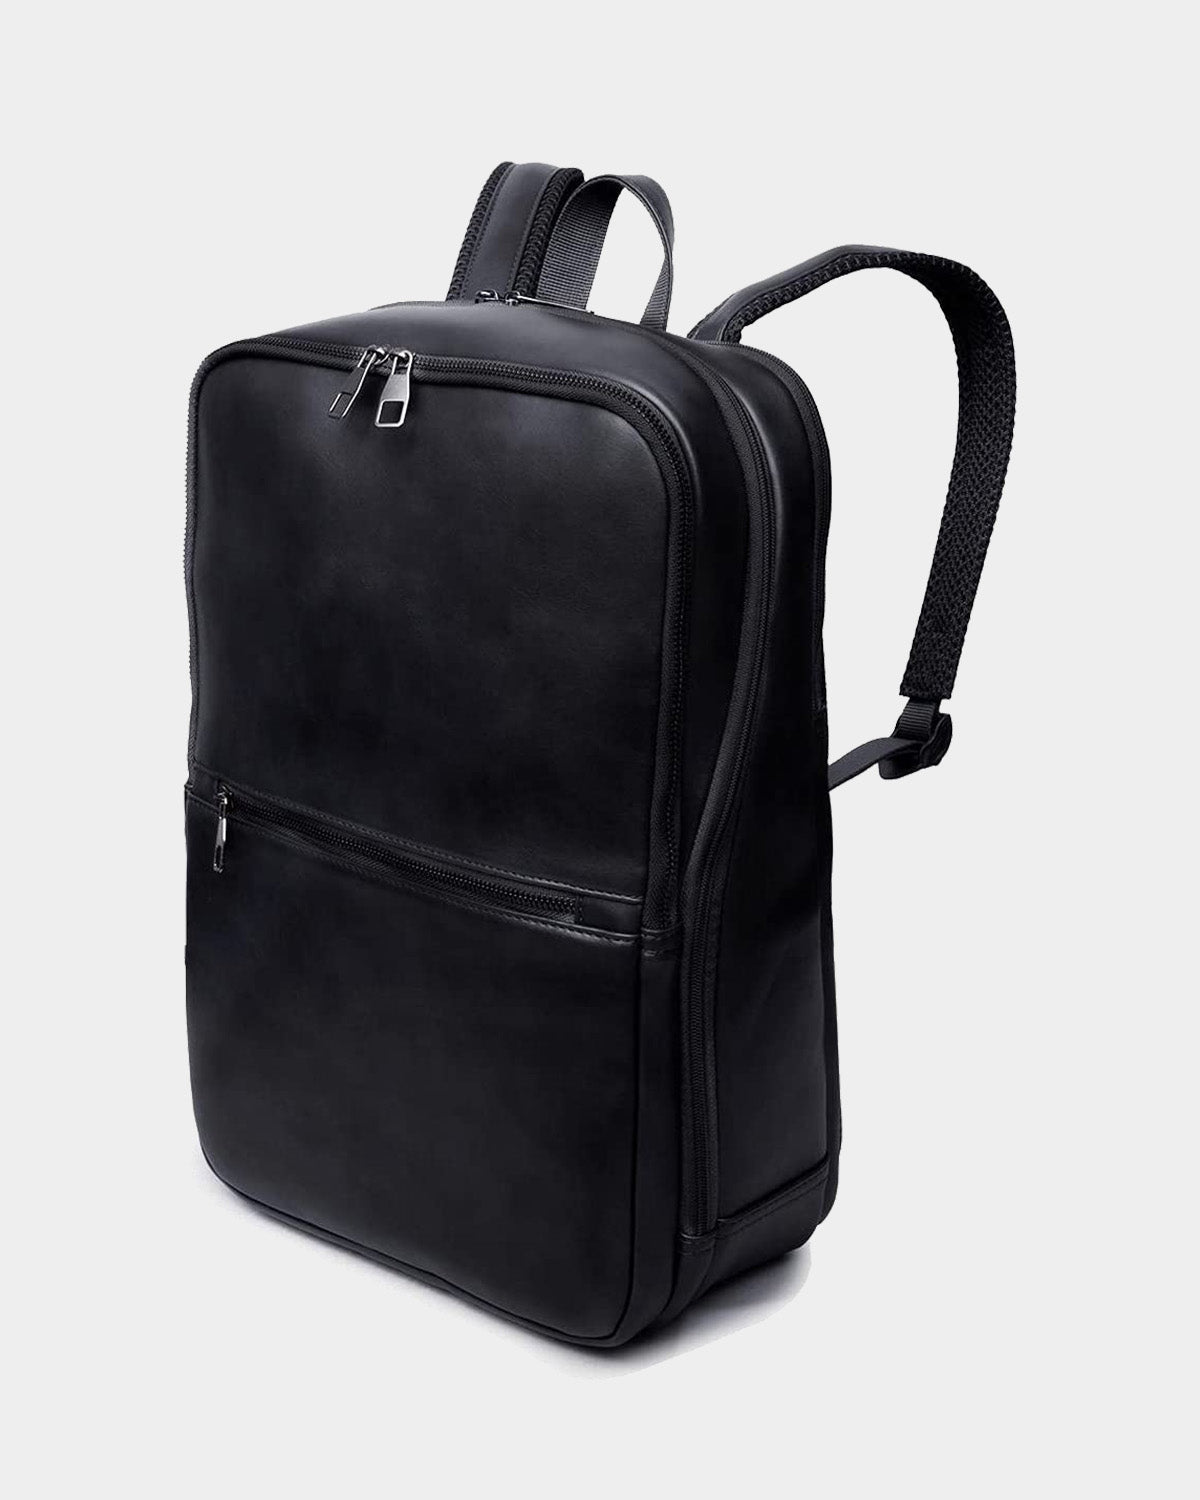 Laptop Backpack, Full Leather, 3 Color Options  99percenthandmade Black  